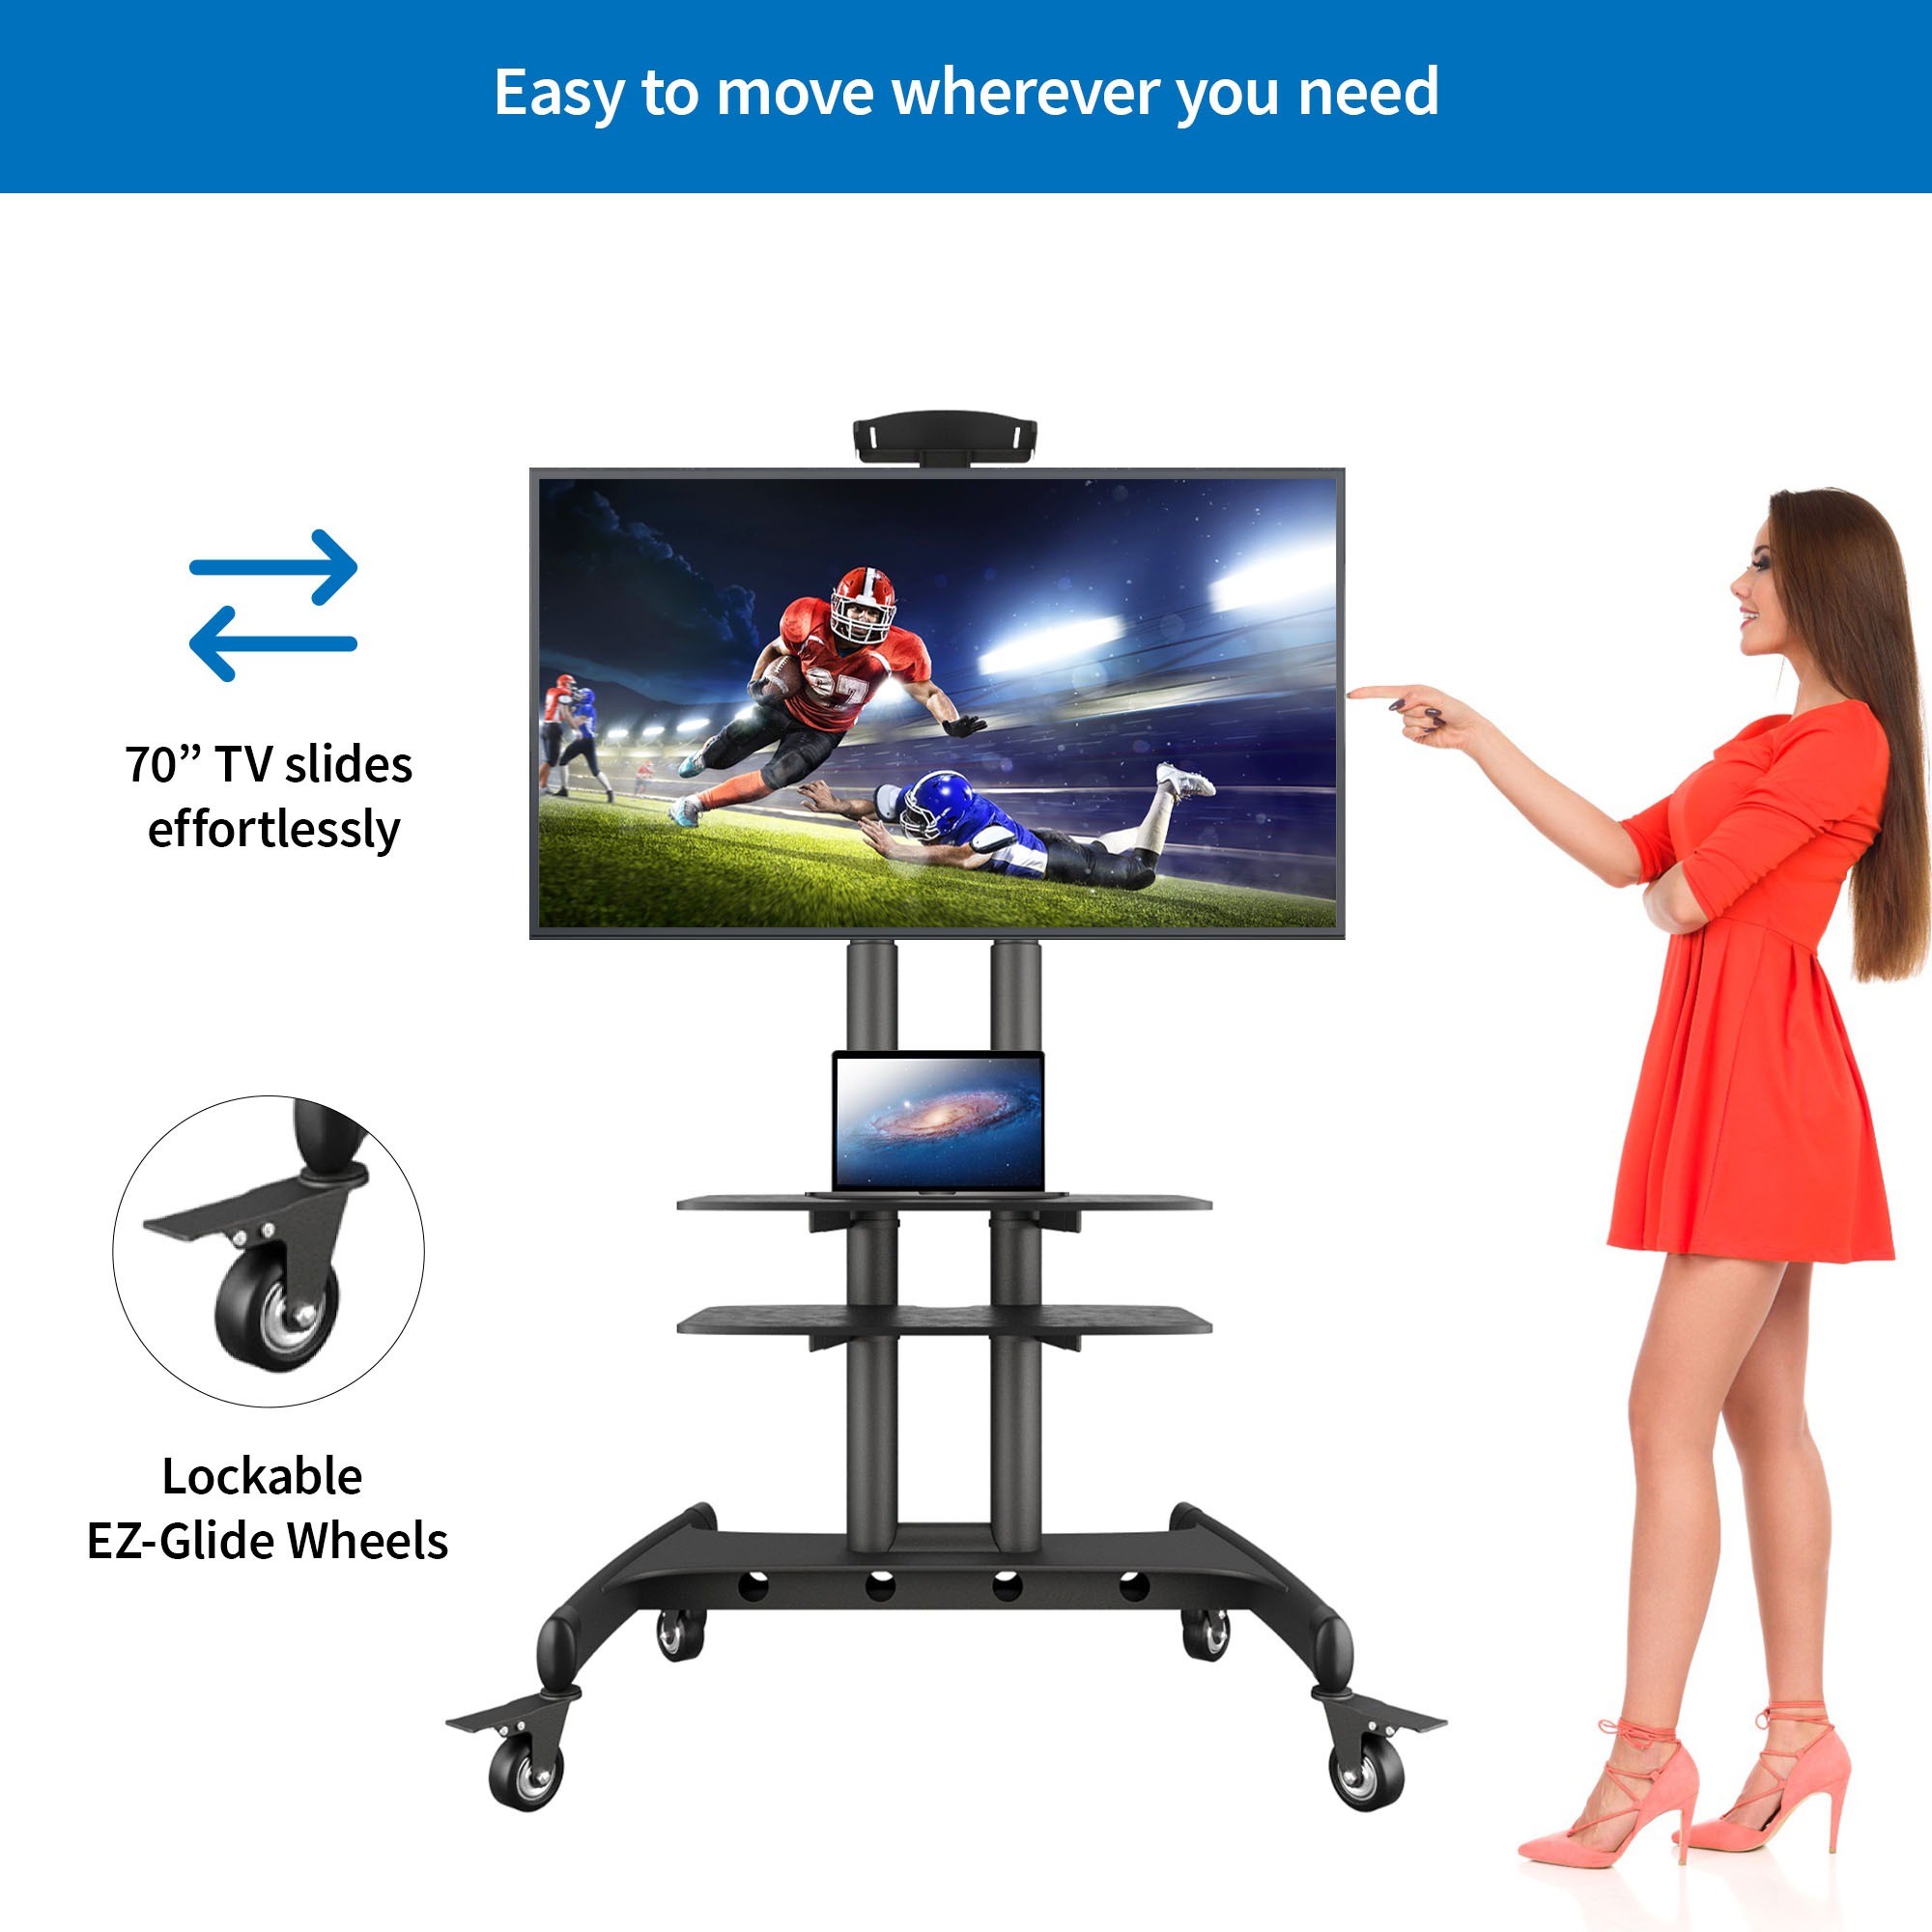 How can a mobile TV stand enhance my home movie viewing experience